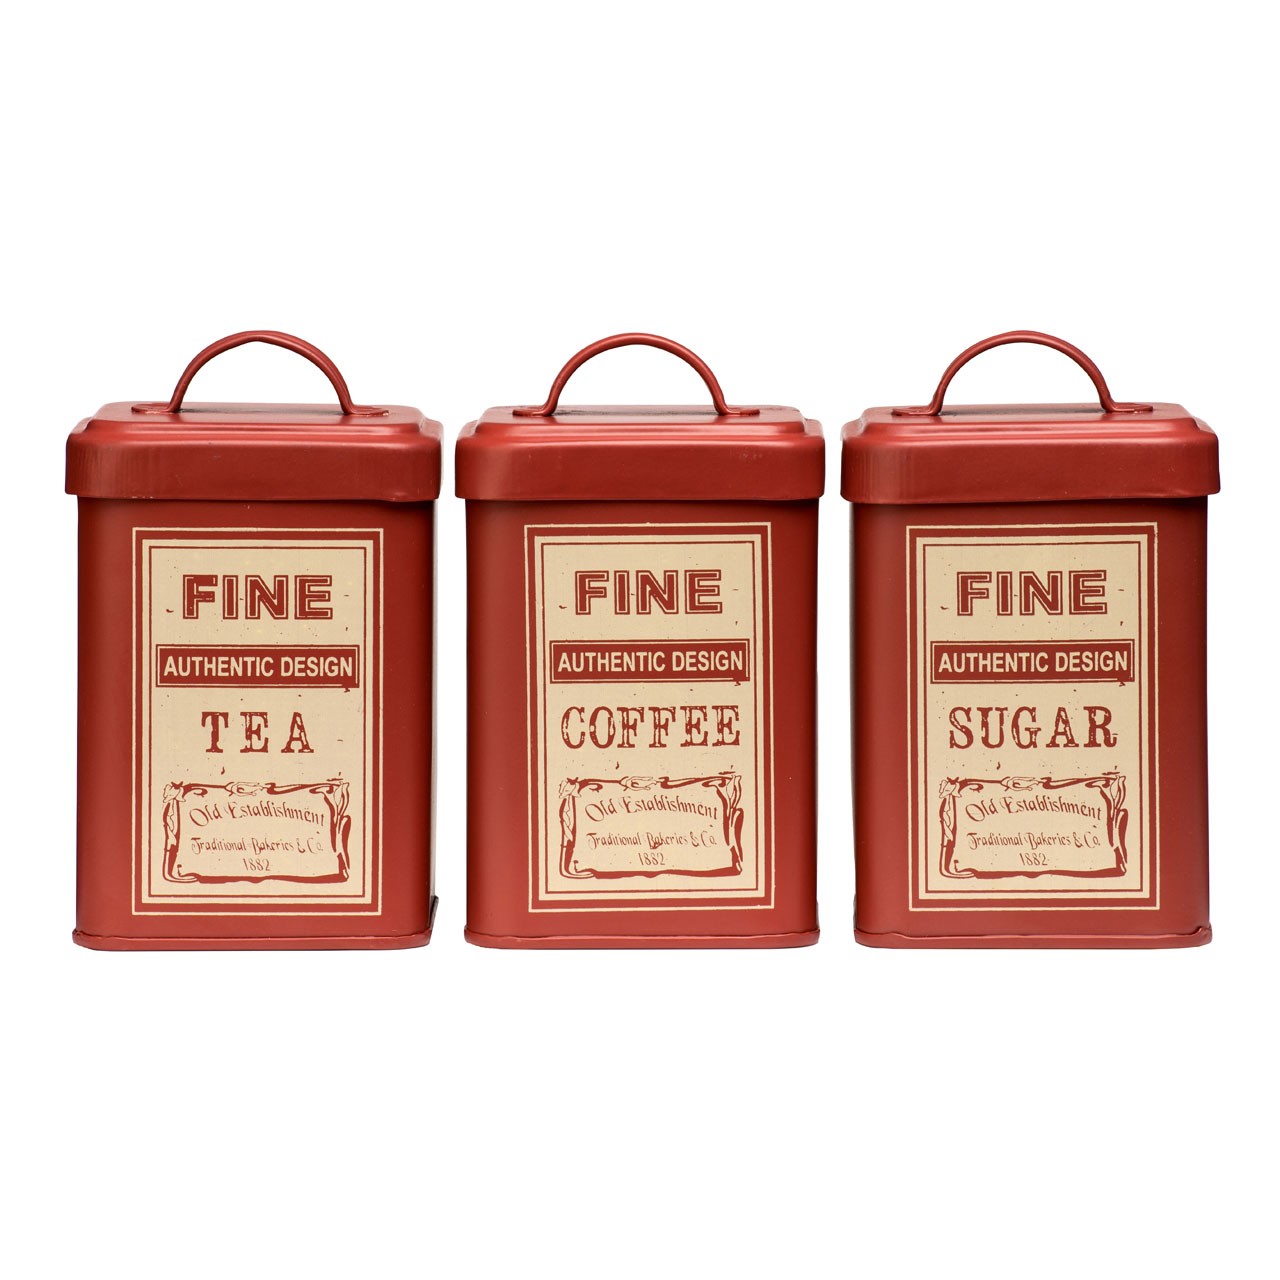 Prime Furnishing Whitby Tea, Coffee & Sugar Canisters - Red